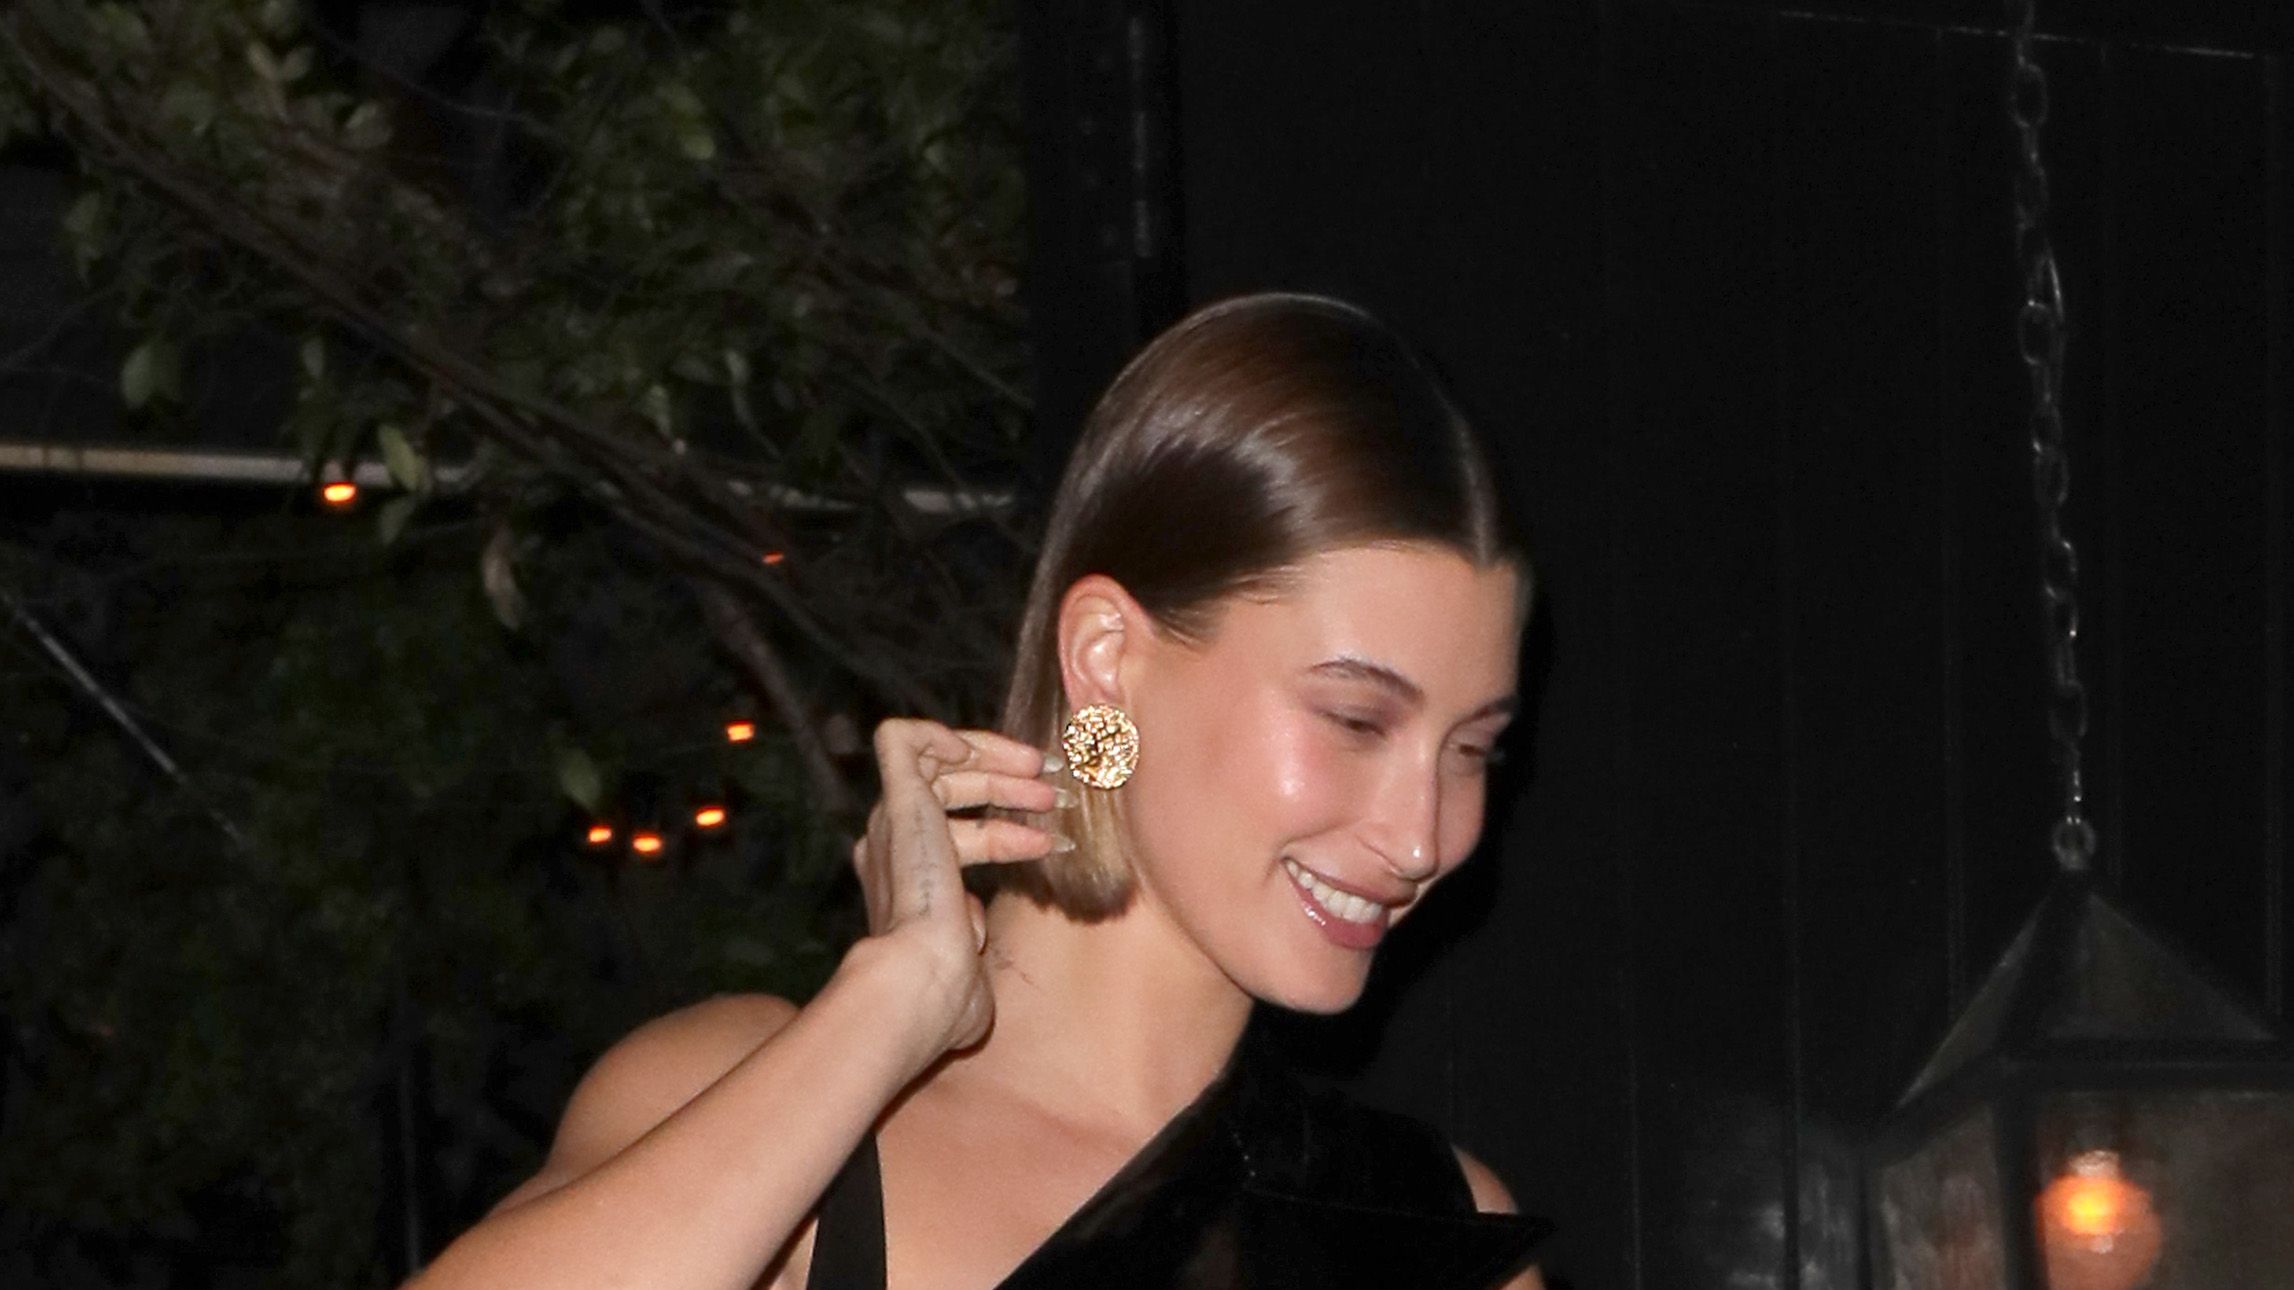 Hailey Bieber Wore a Little Black Latex Dress Out on London Date